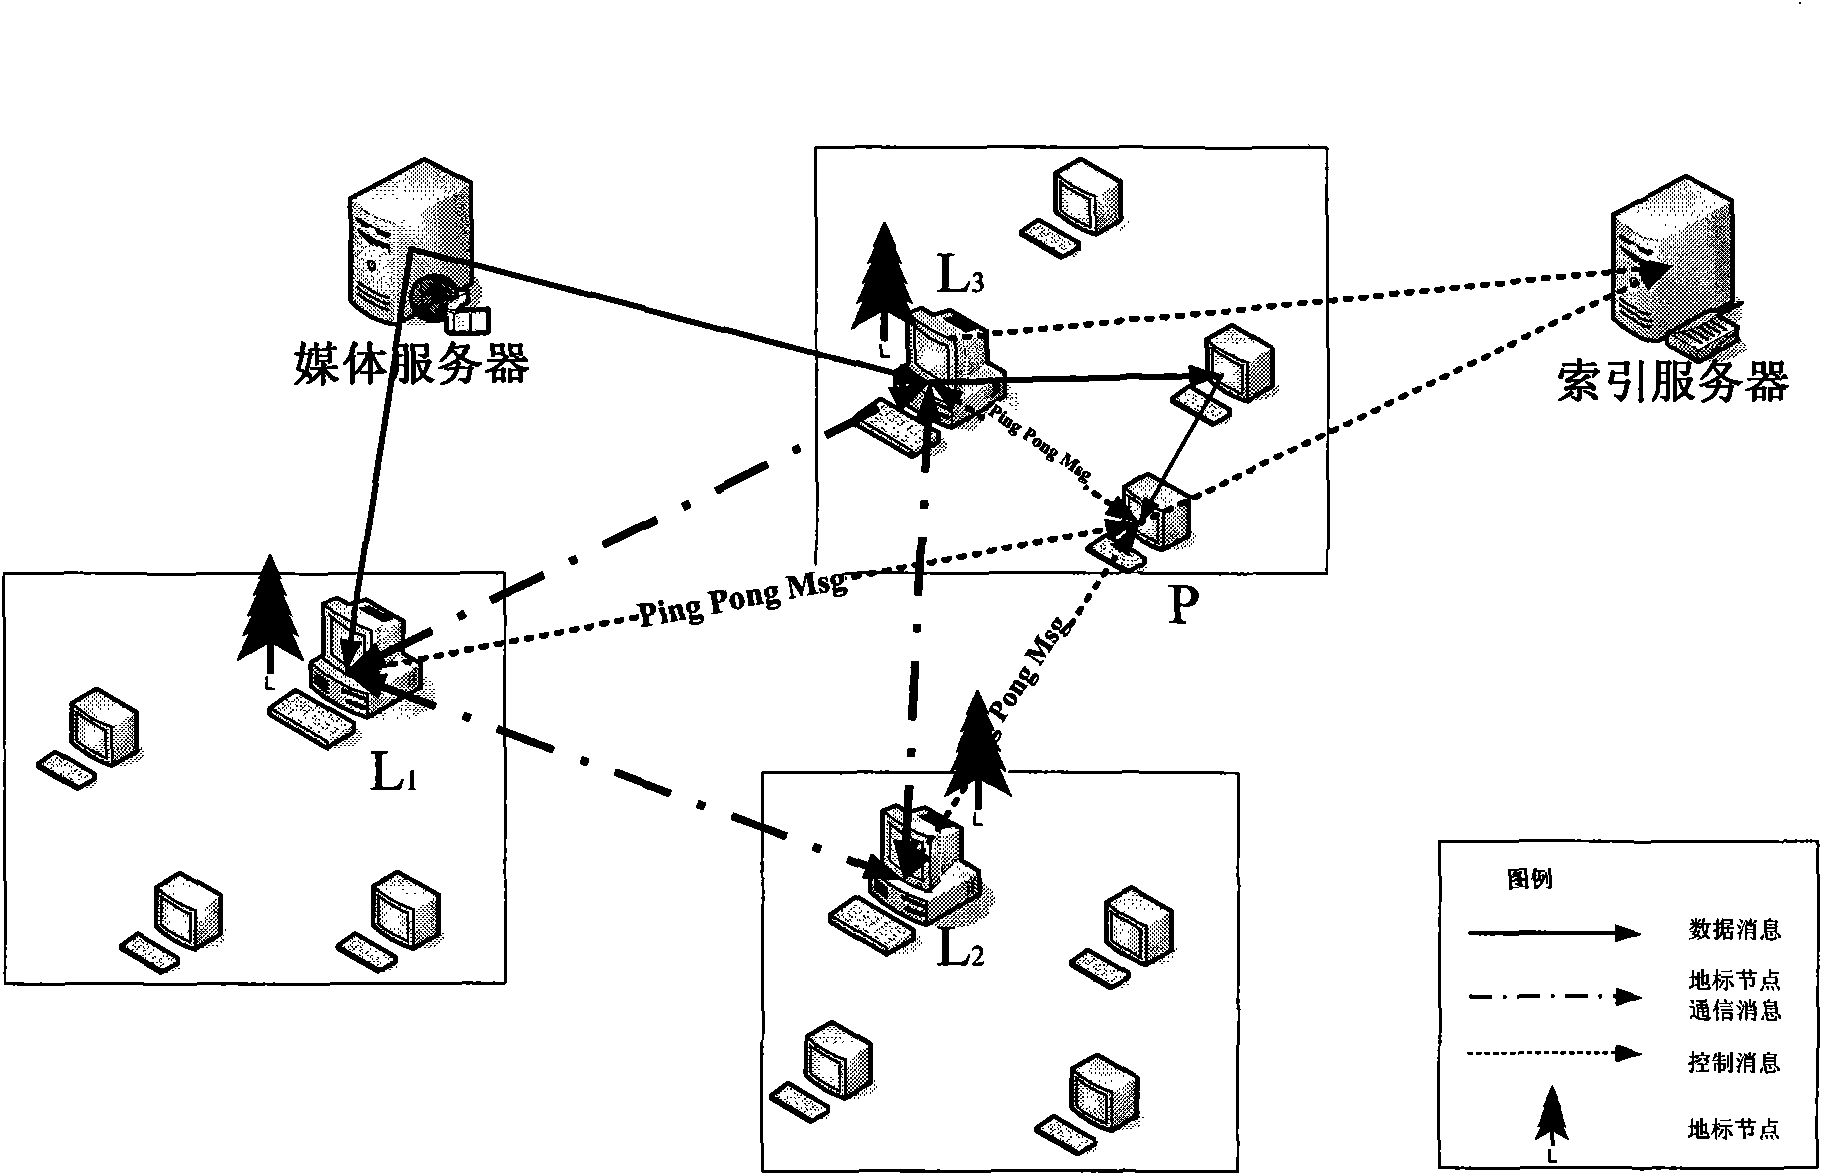 Selection method of neighbor nodes related to physical topology in P2P system